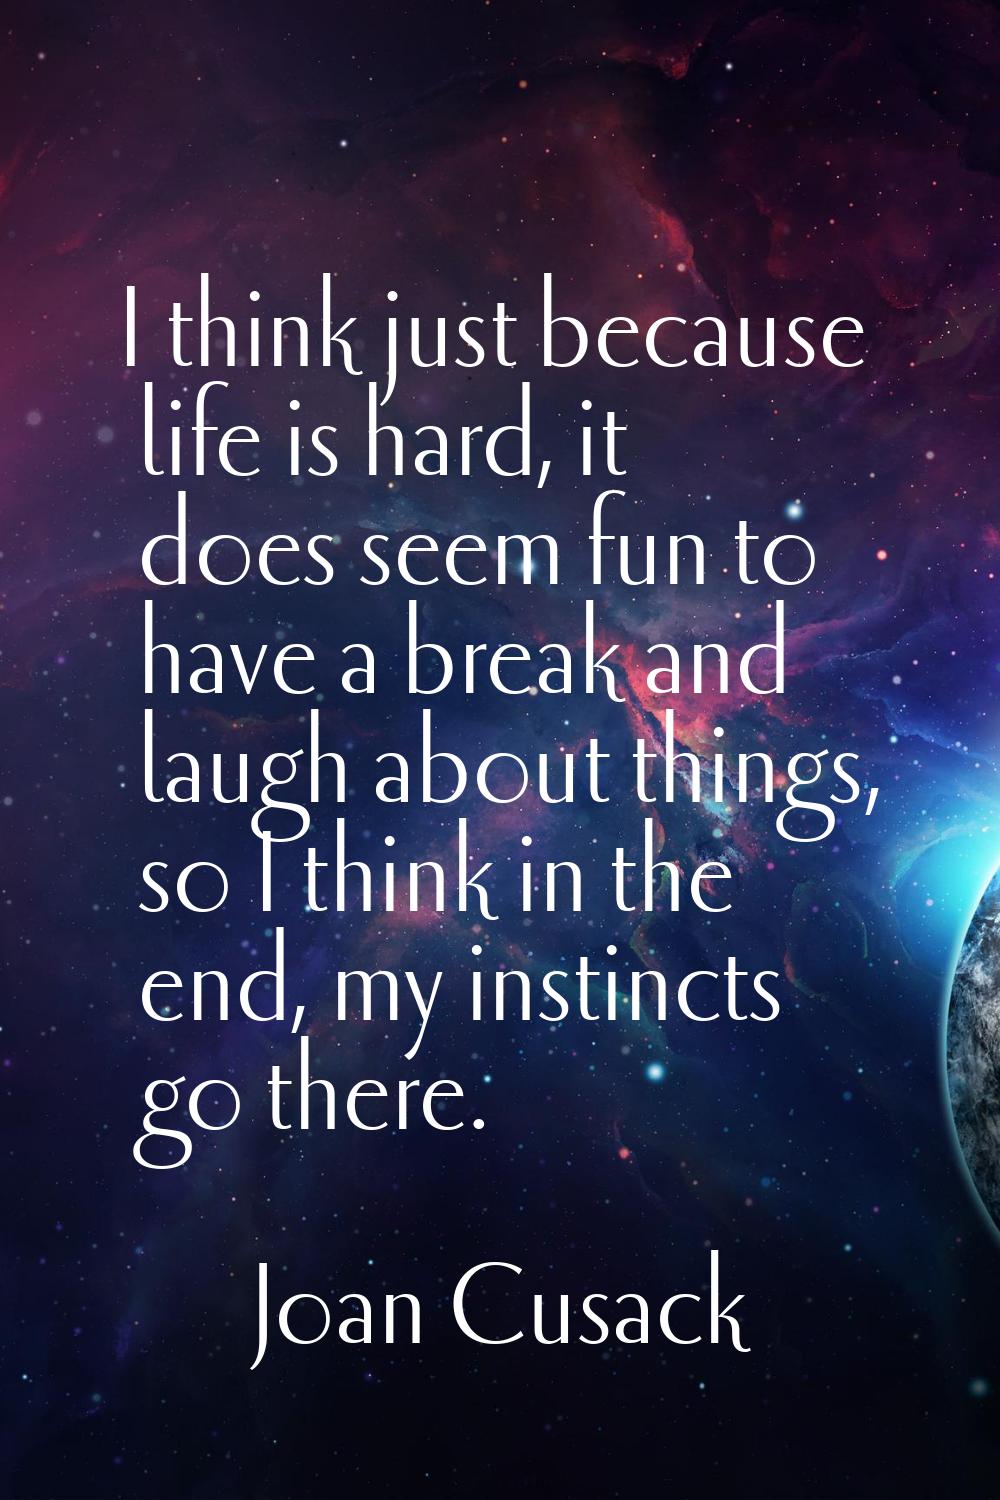 I think just because life is hard, it does seem fun to have a break and laugh about things, so I th